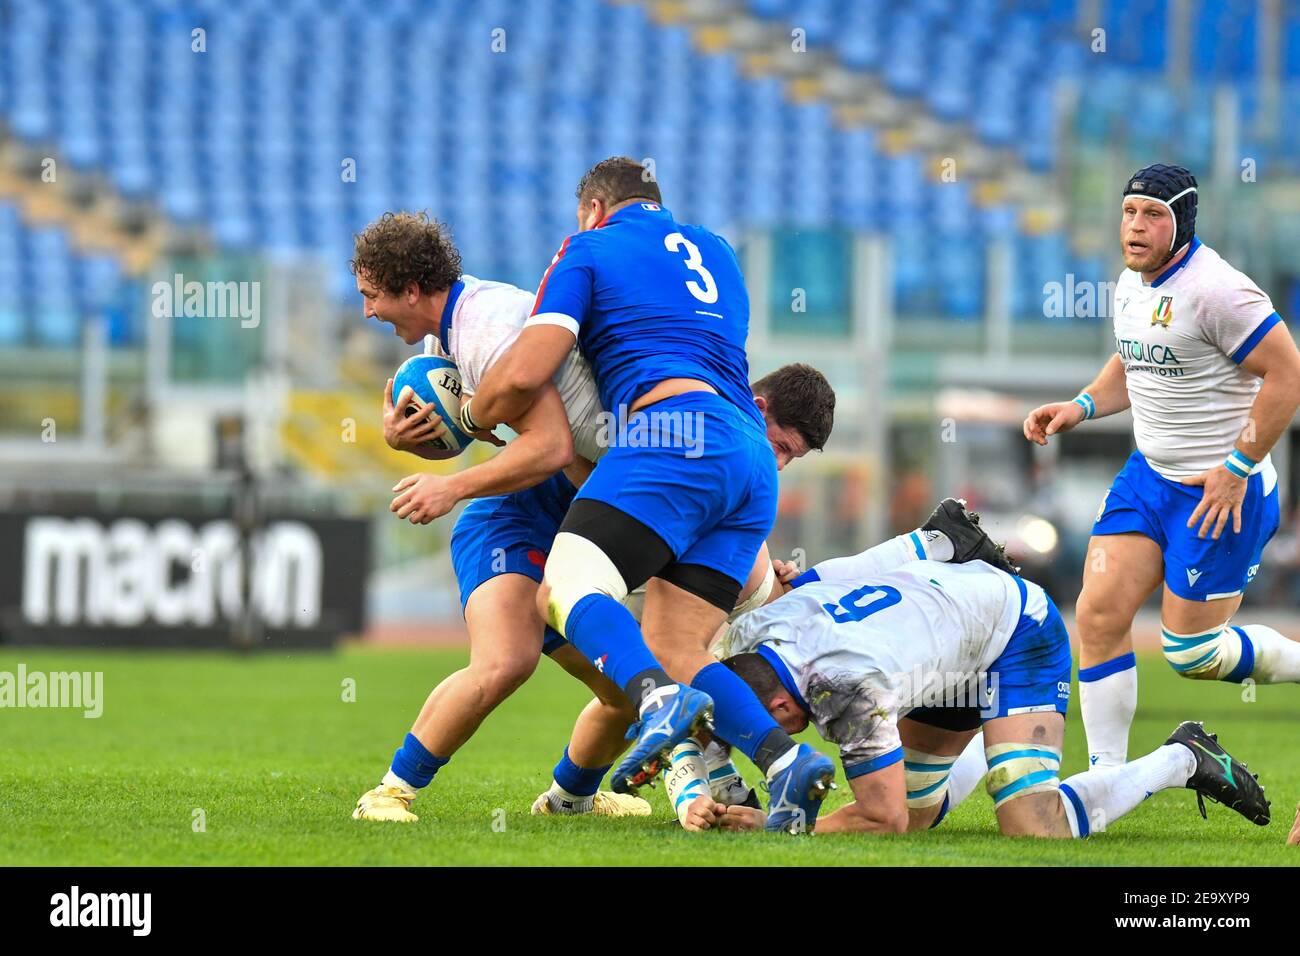 Rome, Italy. 6th Feb, 2021. Rome, Italy, Stadio Olimpico, February 06, 2021, Michele Lamaro (Italy) carries the ball during Italy vs France - Rugby Six Nations match Credit: Carlo Cappuccitti/LPS/ZUMA Wire/Alamy Live News Stock Photo